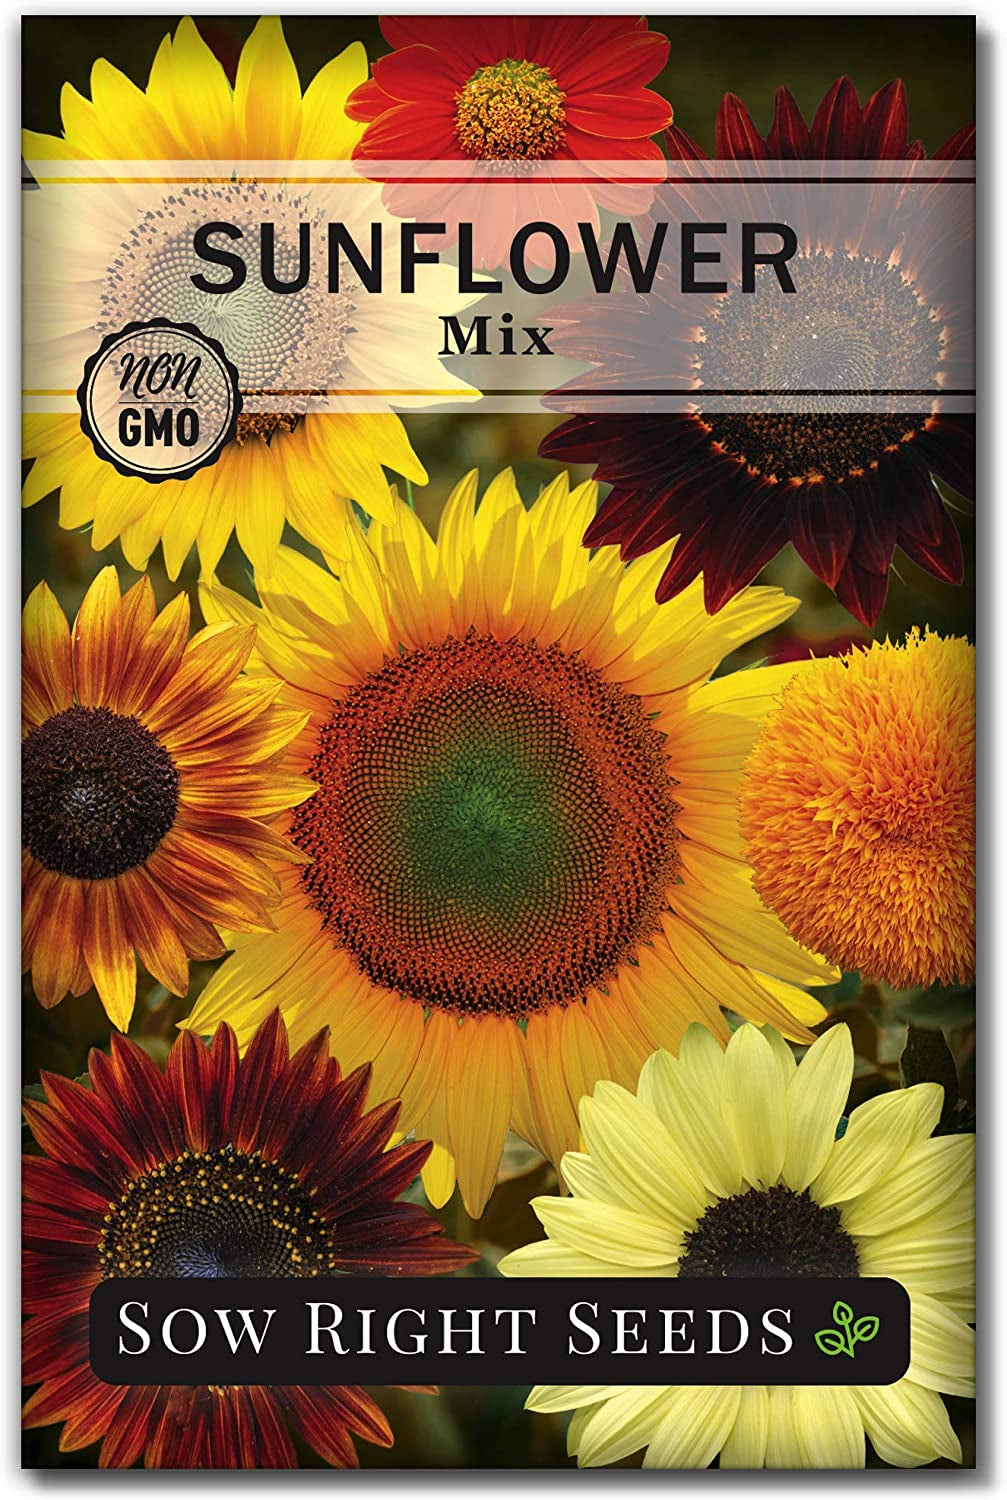 - Mixed Sunflower Seeds for Planting - Non-Gmo Heirloom Packet with Instructions - Great Wedding or Party Favor - Grow Giant Sunflowers in an Assortment of Bright, Unique Colors(1)